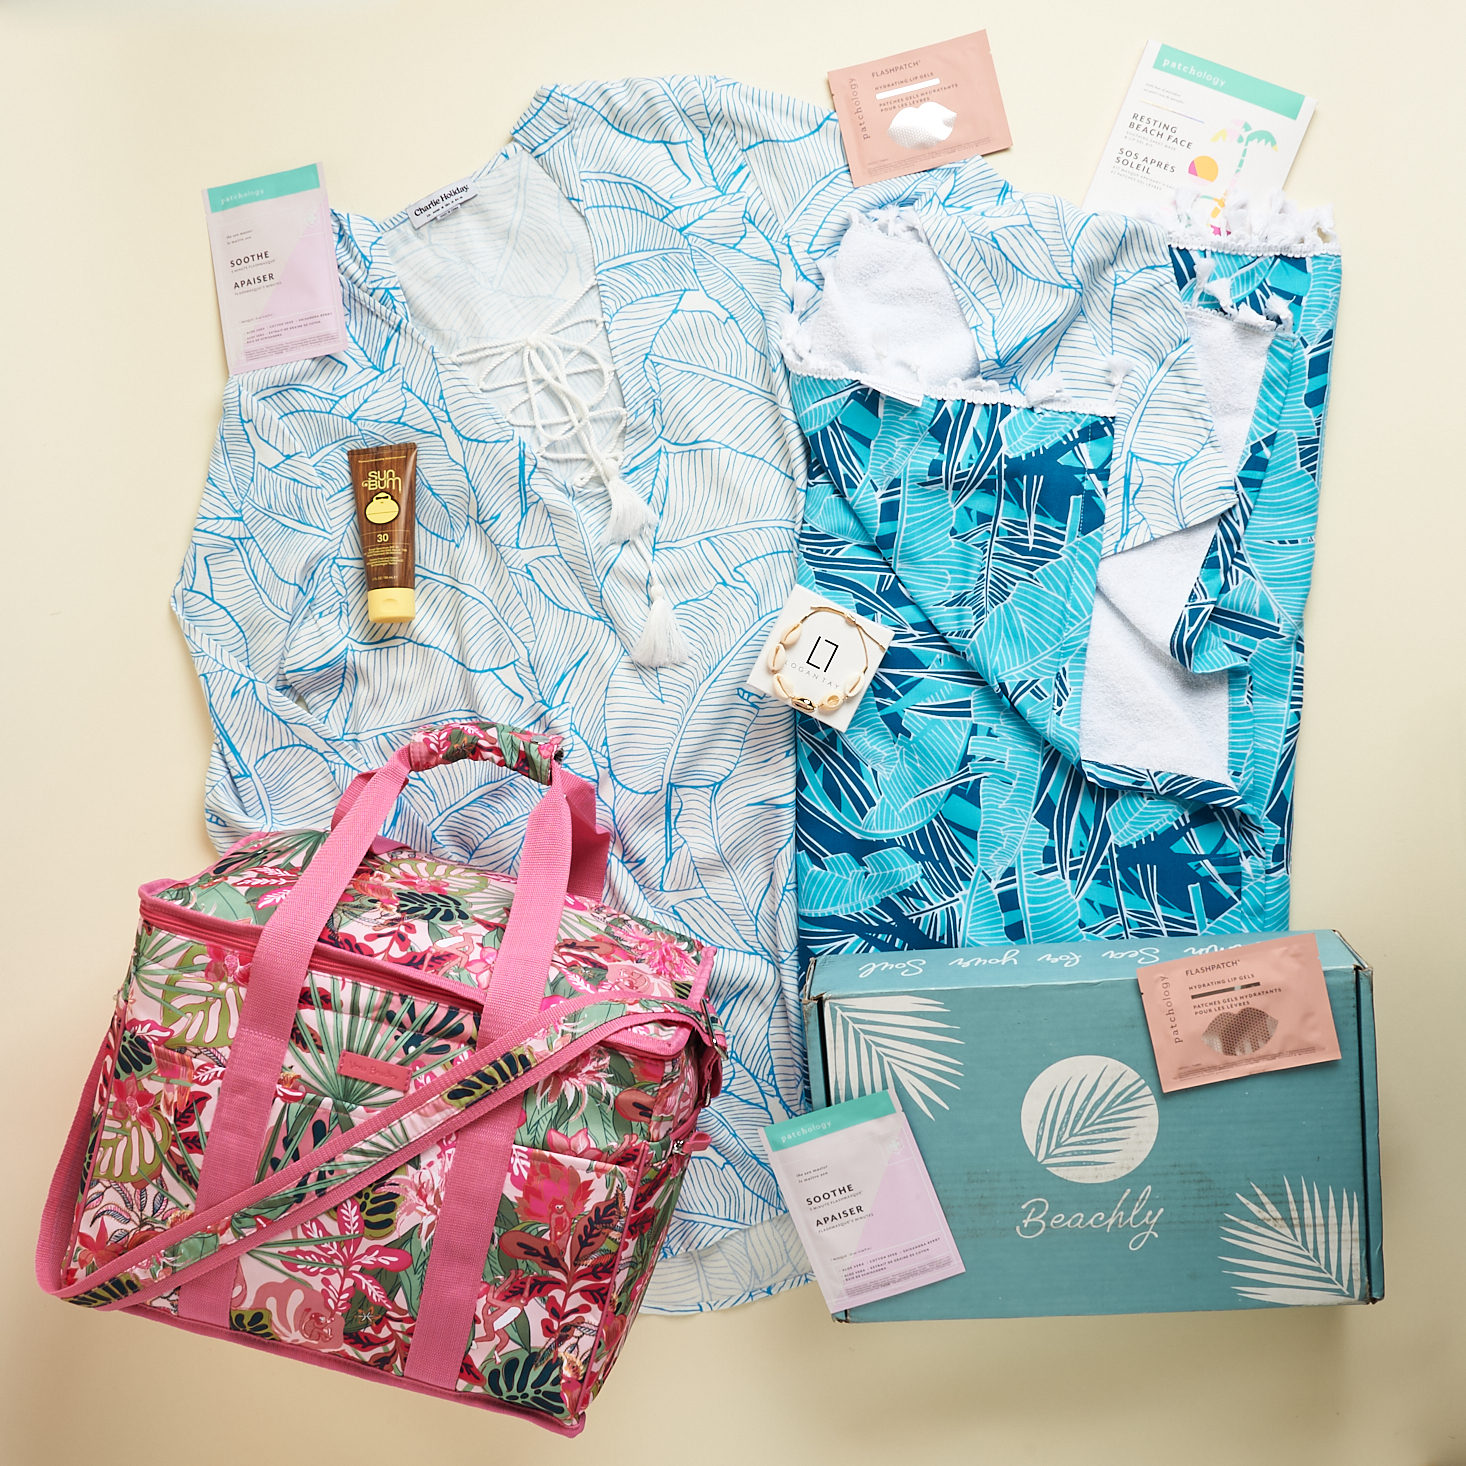 Beachly Lifestyle Box Review – Summer 2021